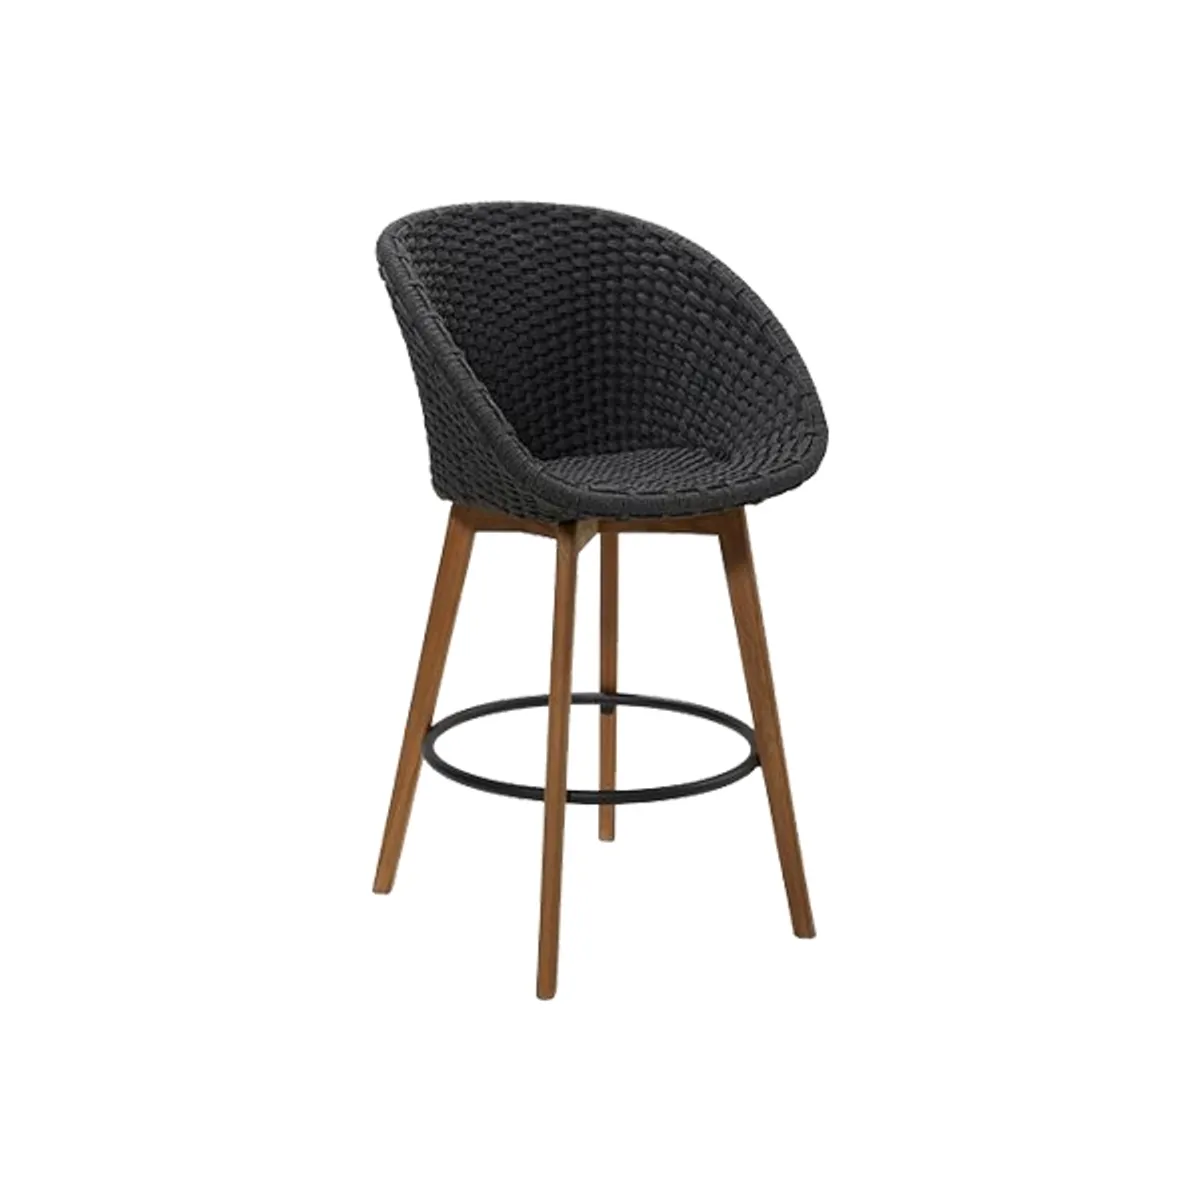 Persy rope bar stool Inside Out Contracts